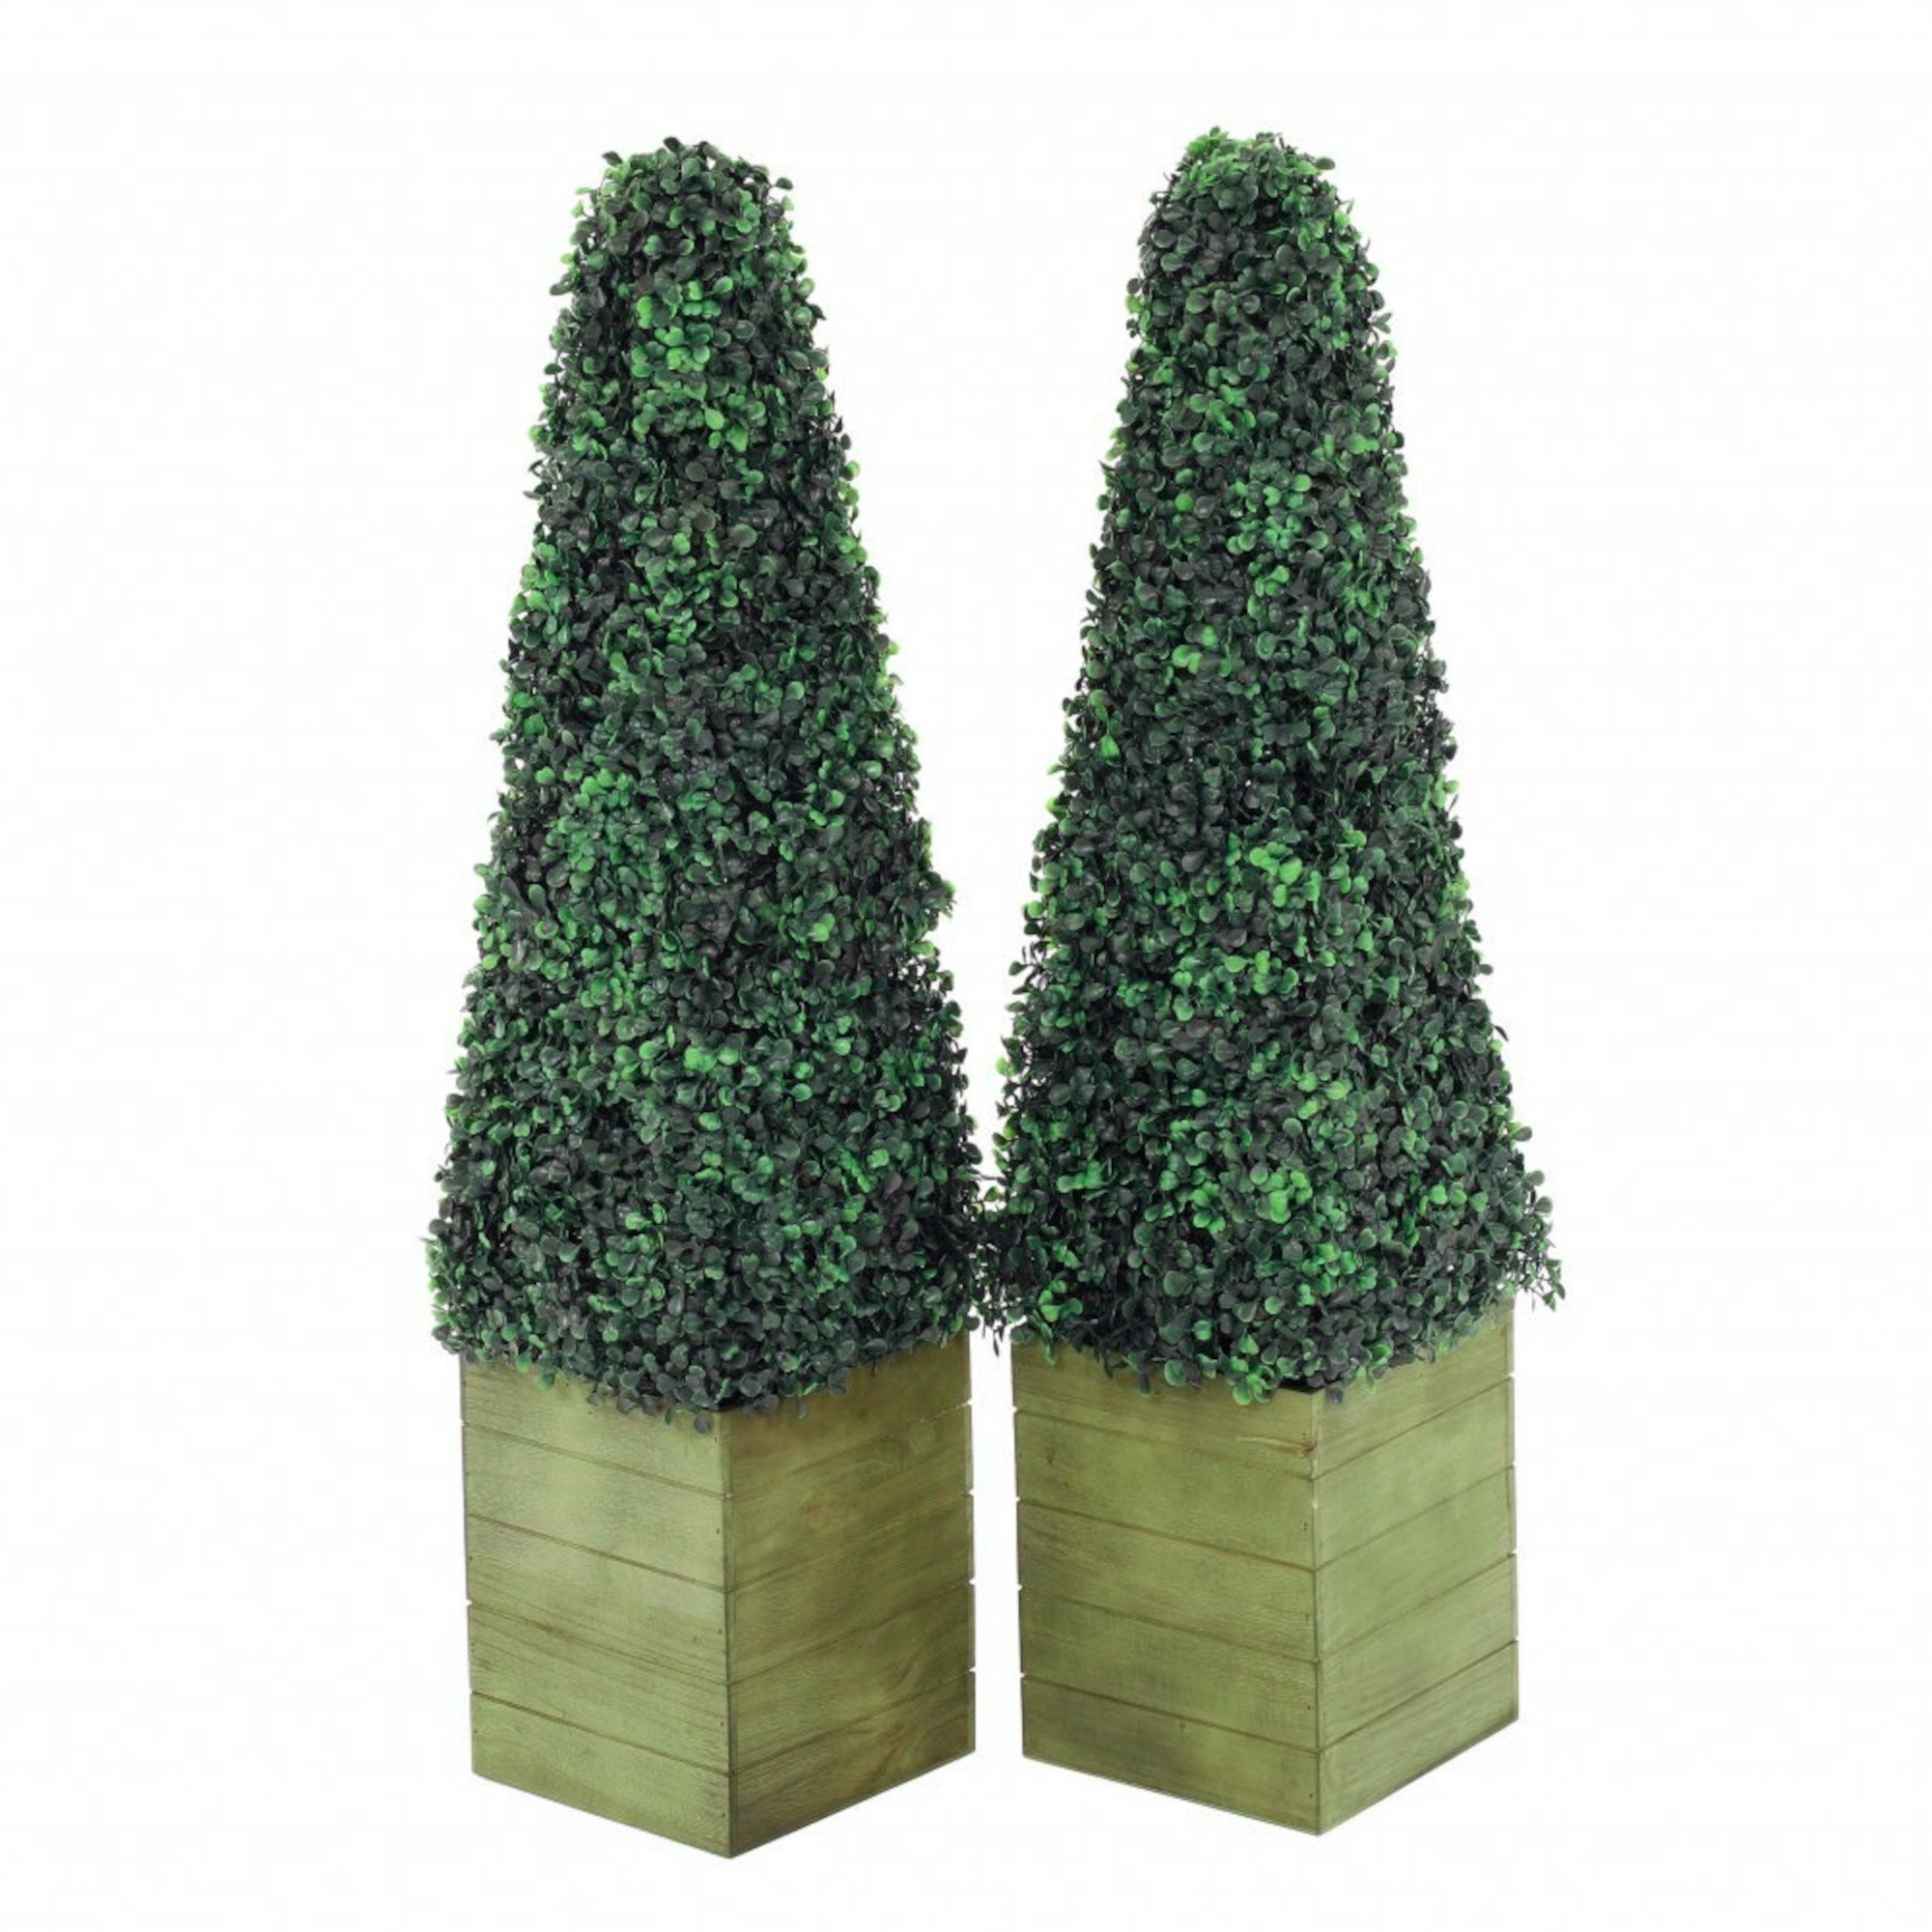 Set of 2 Artificial Topiary Boxwood Pyramid Trees 90cm Indoor Outdoor Decoration